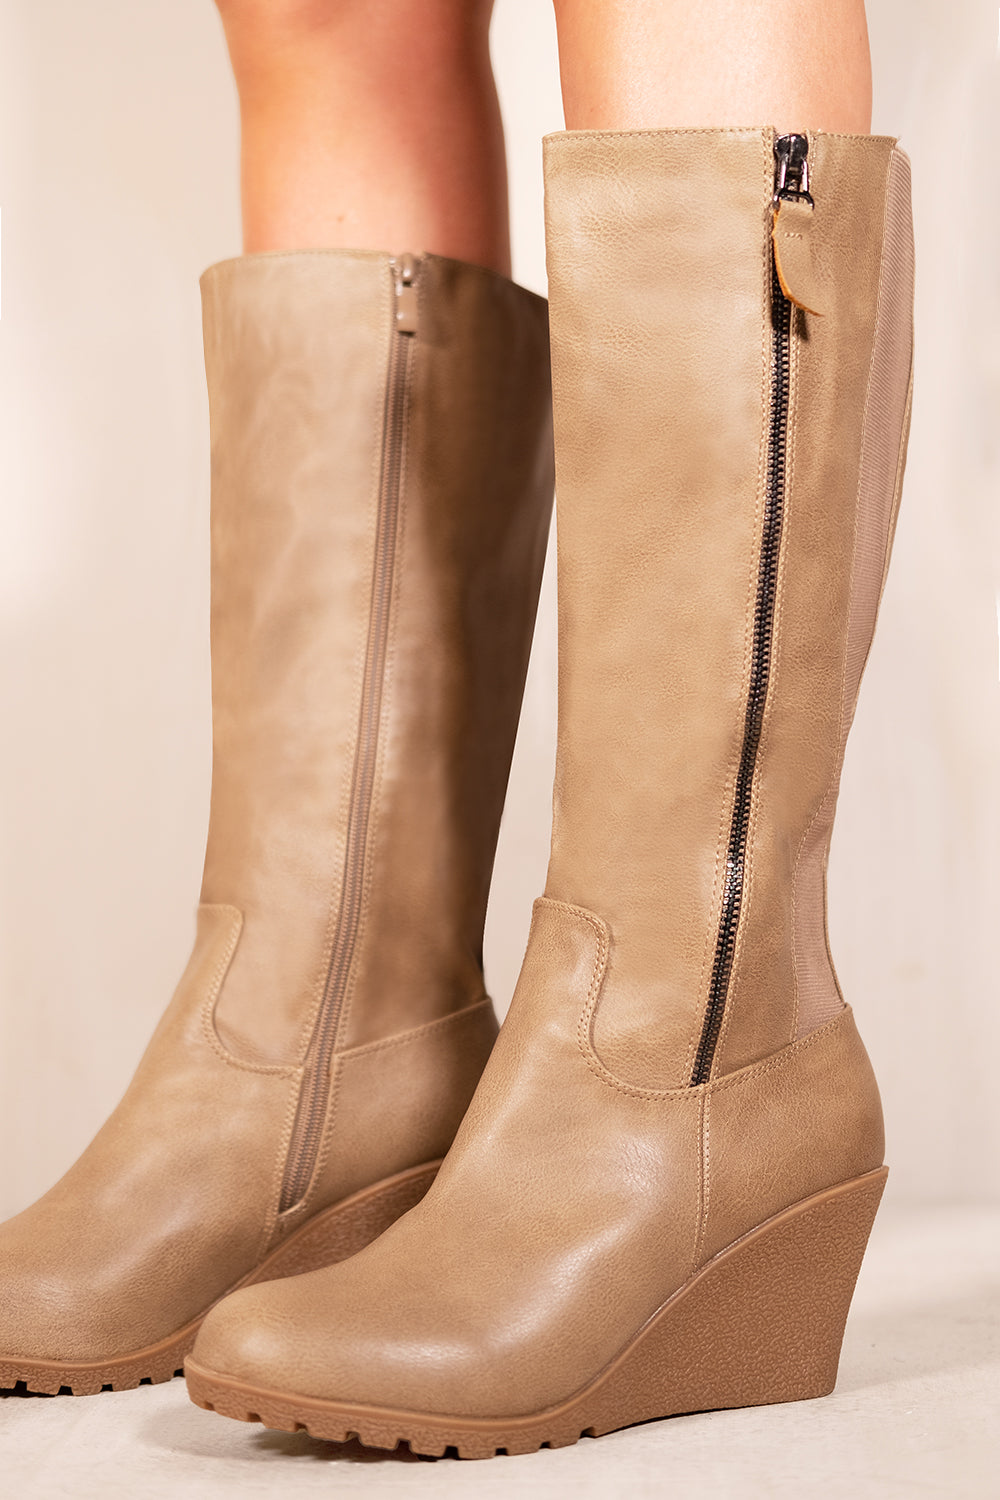 LARA WEDGE HEEL MID CALF HIGH BOOTS WITH SIDE ZIP IN KHAKI FAUX LEATHER